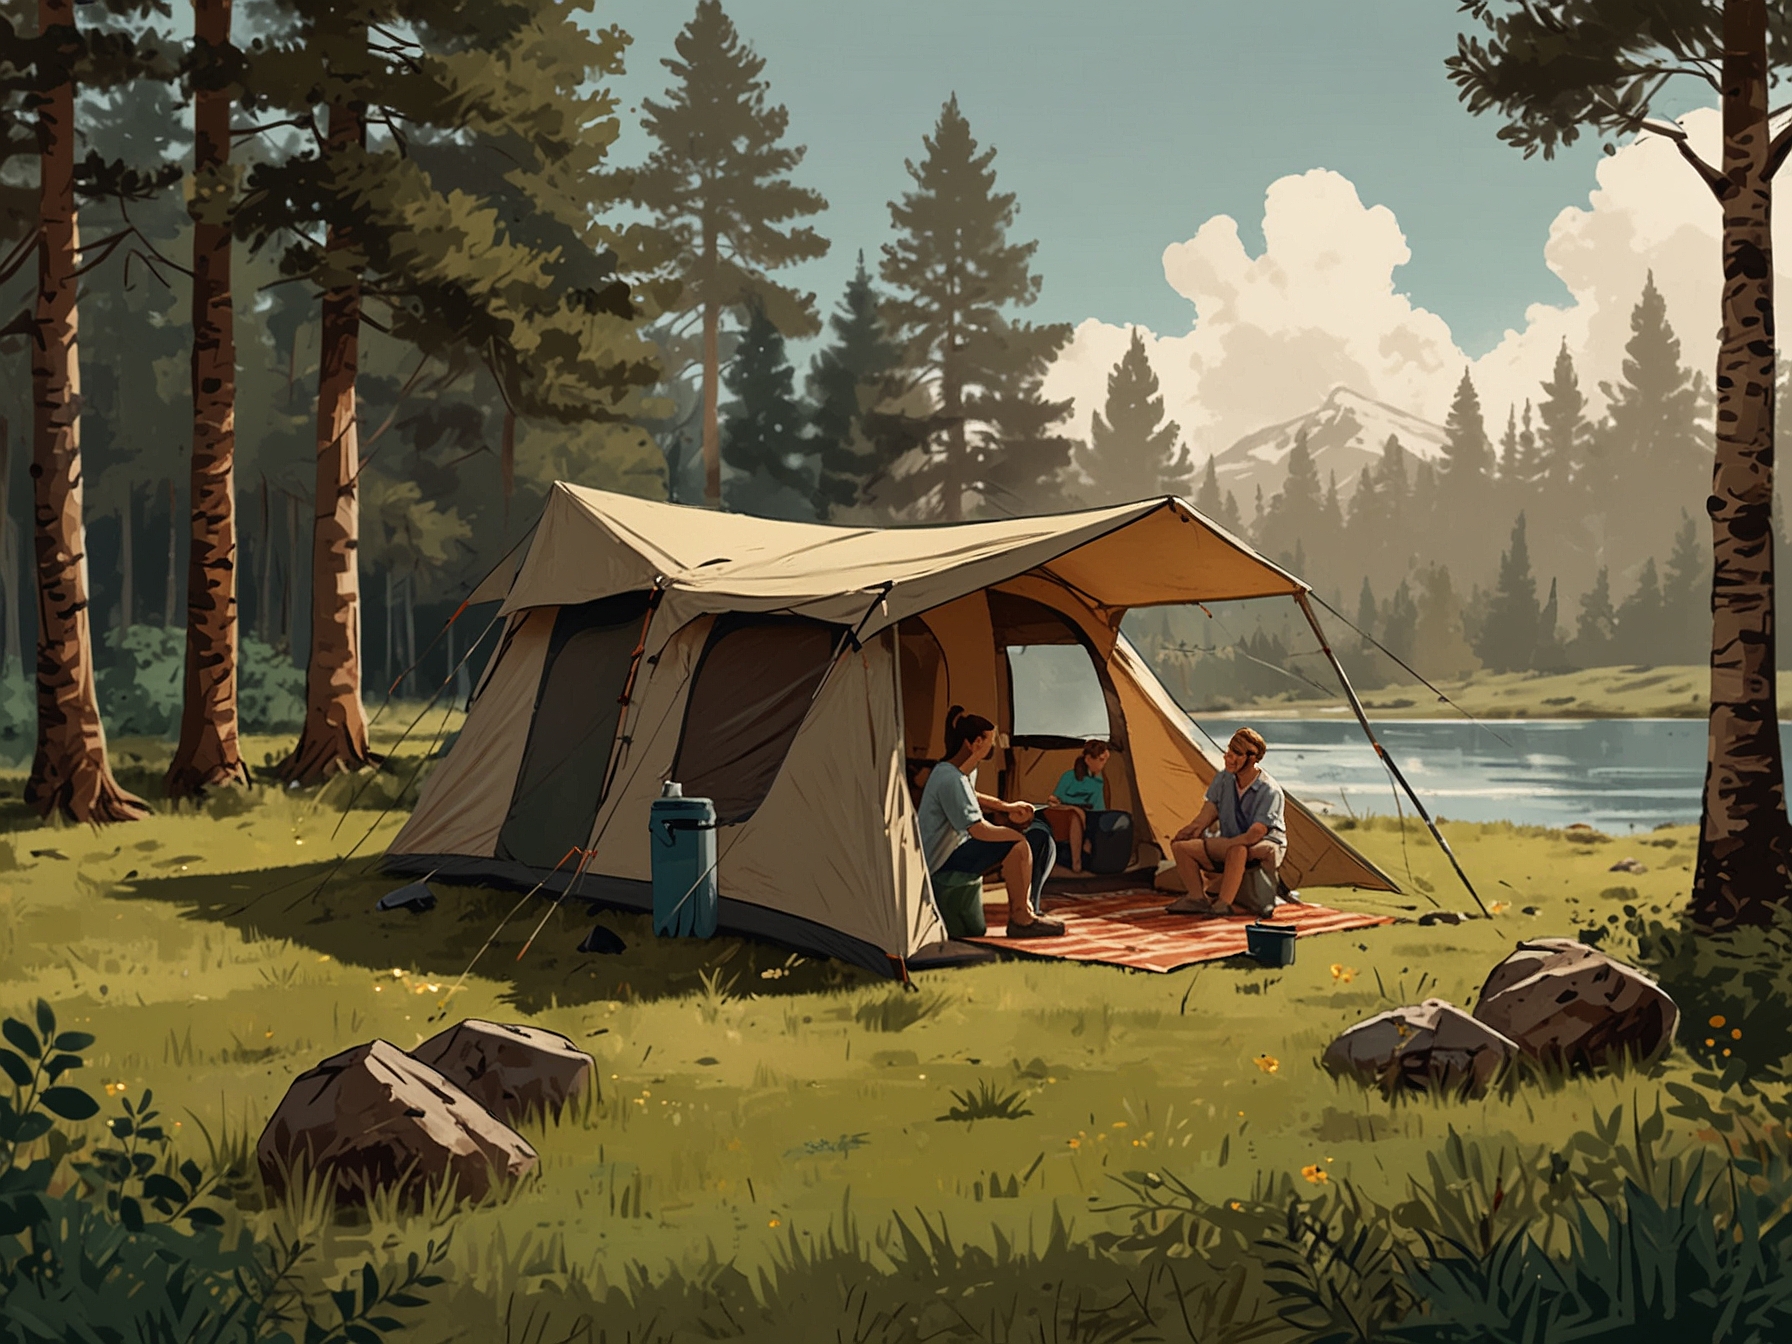 A family sets up a tent at a picturesque, family-friendly campsite with amenities like clean bathrooms and recreational activities, ensuring comfort and convenience.